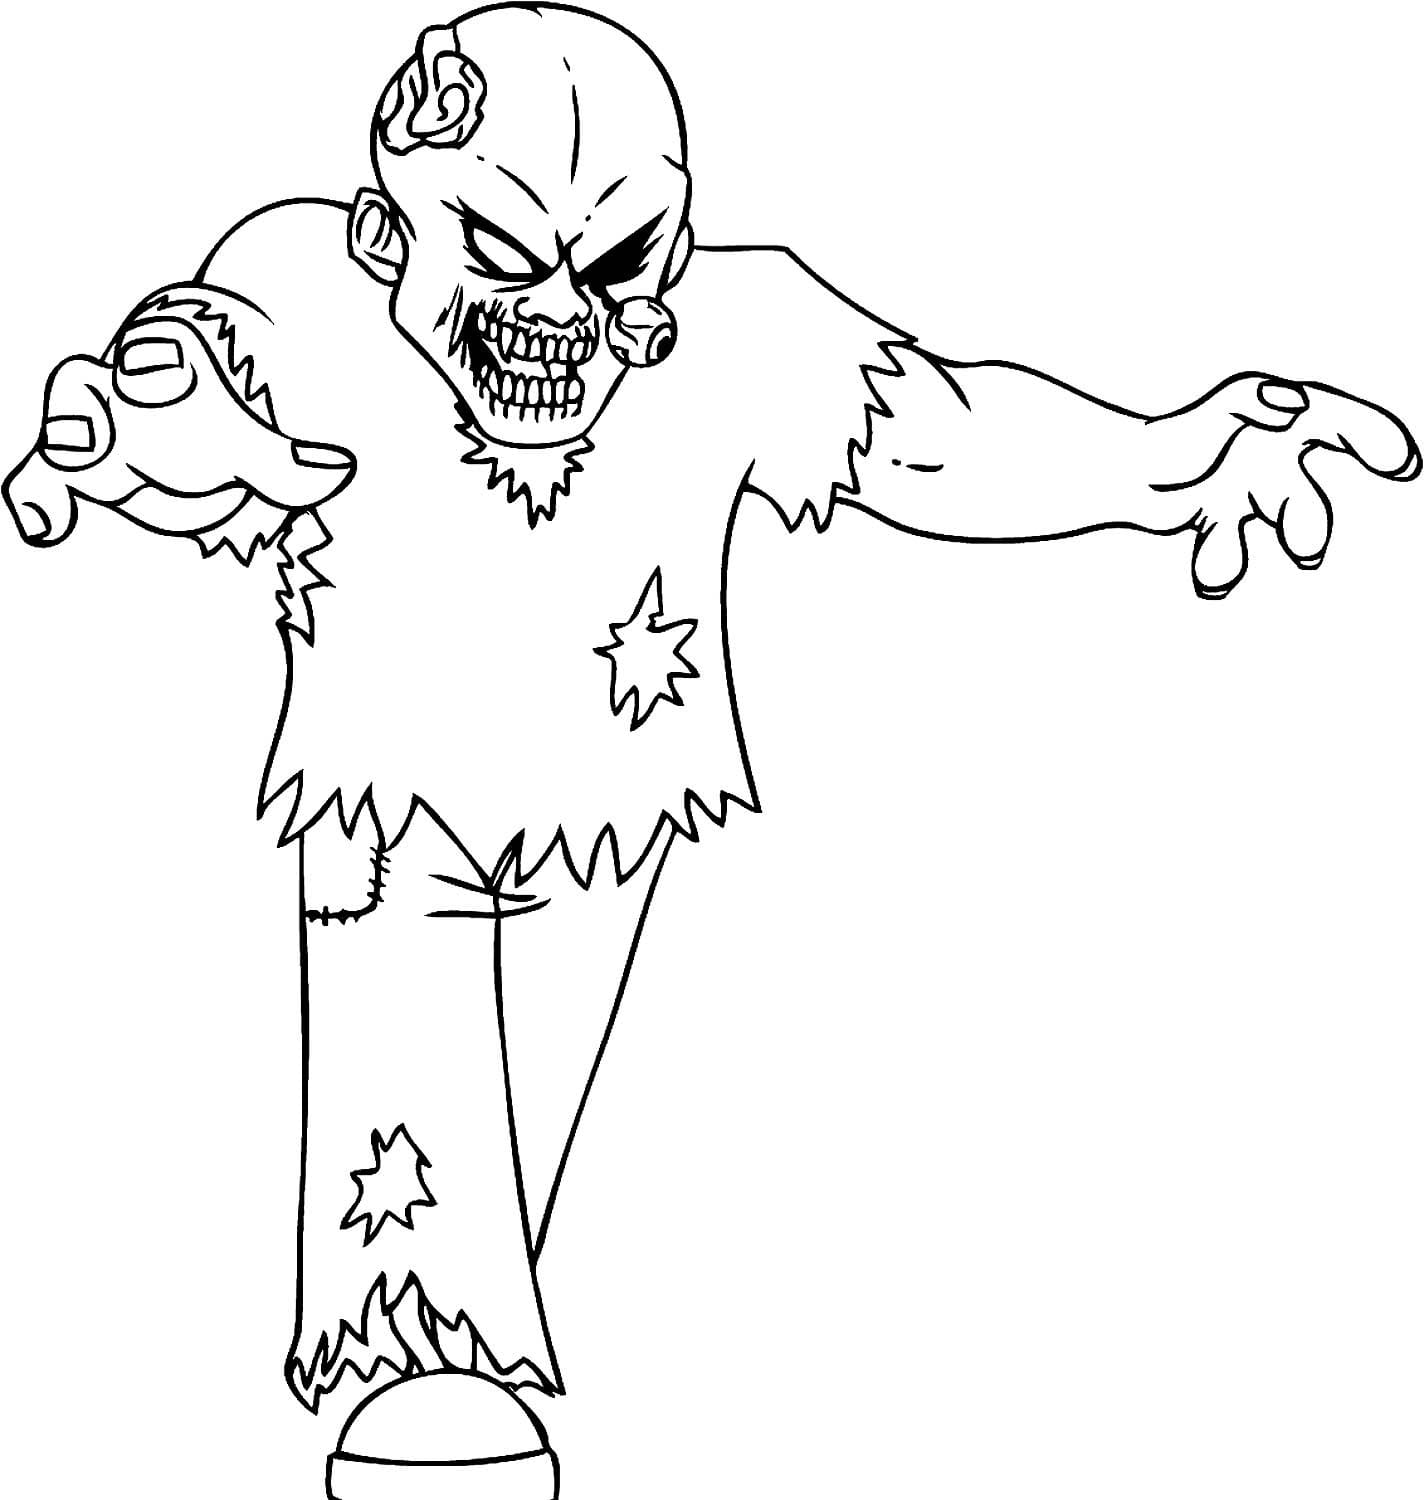 Coloring page Zombies A zombie without an eye